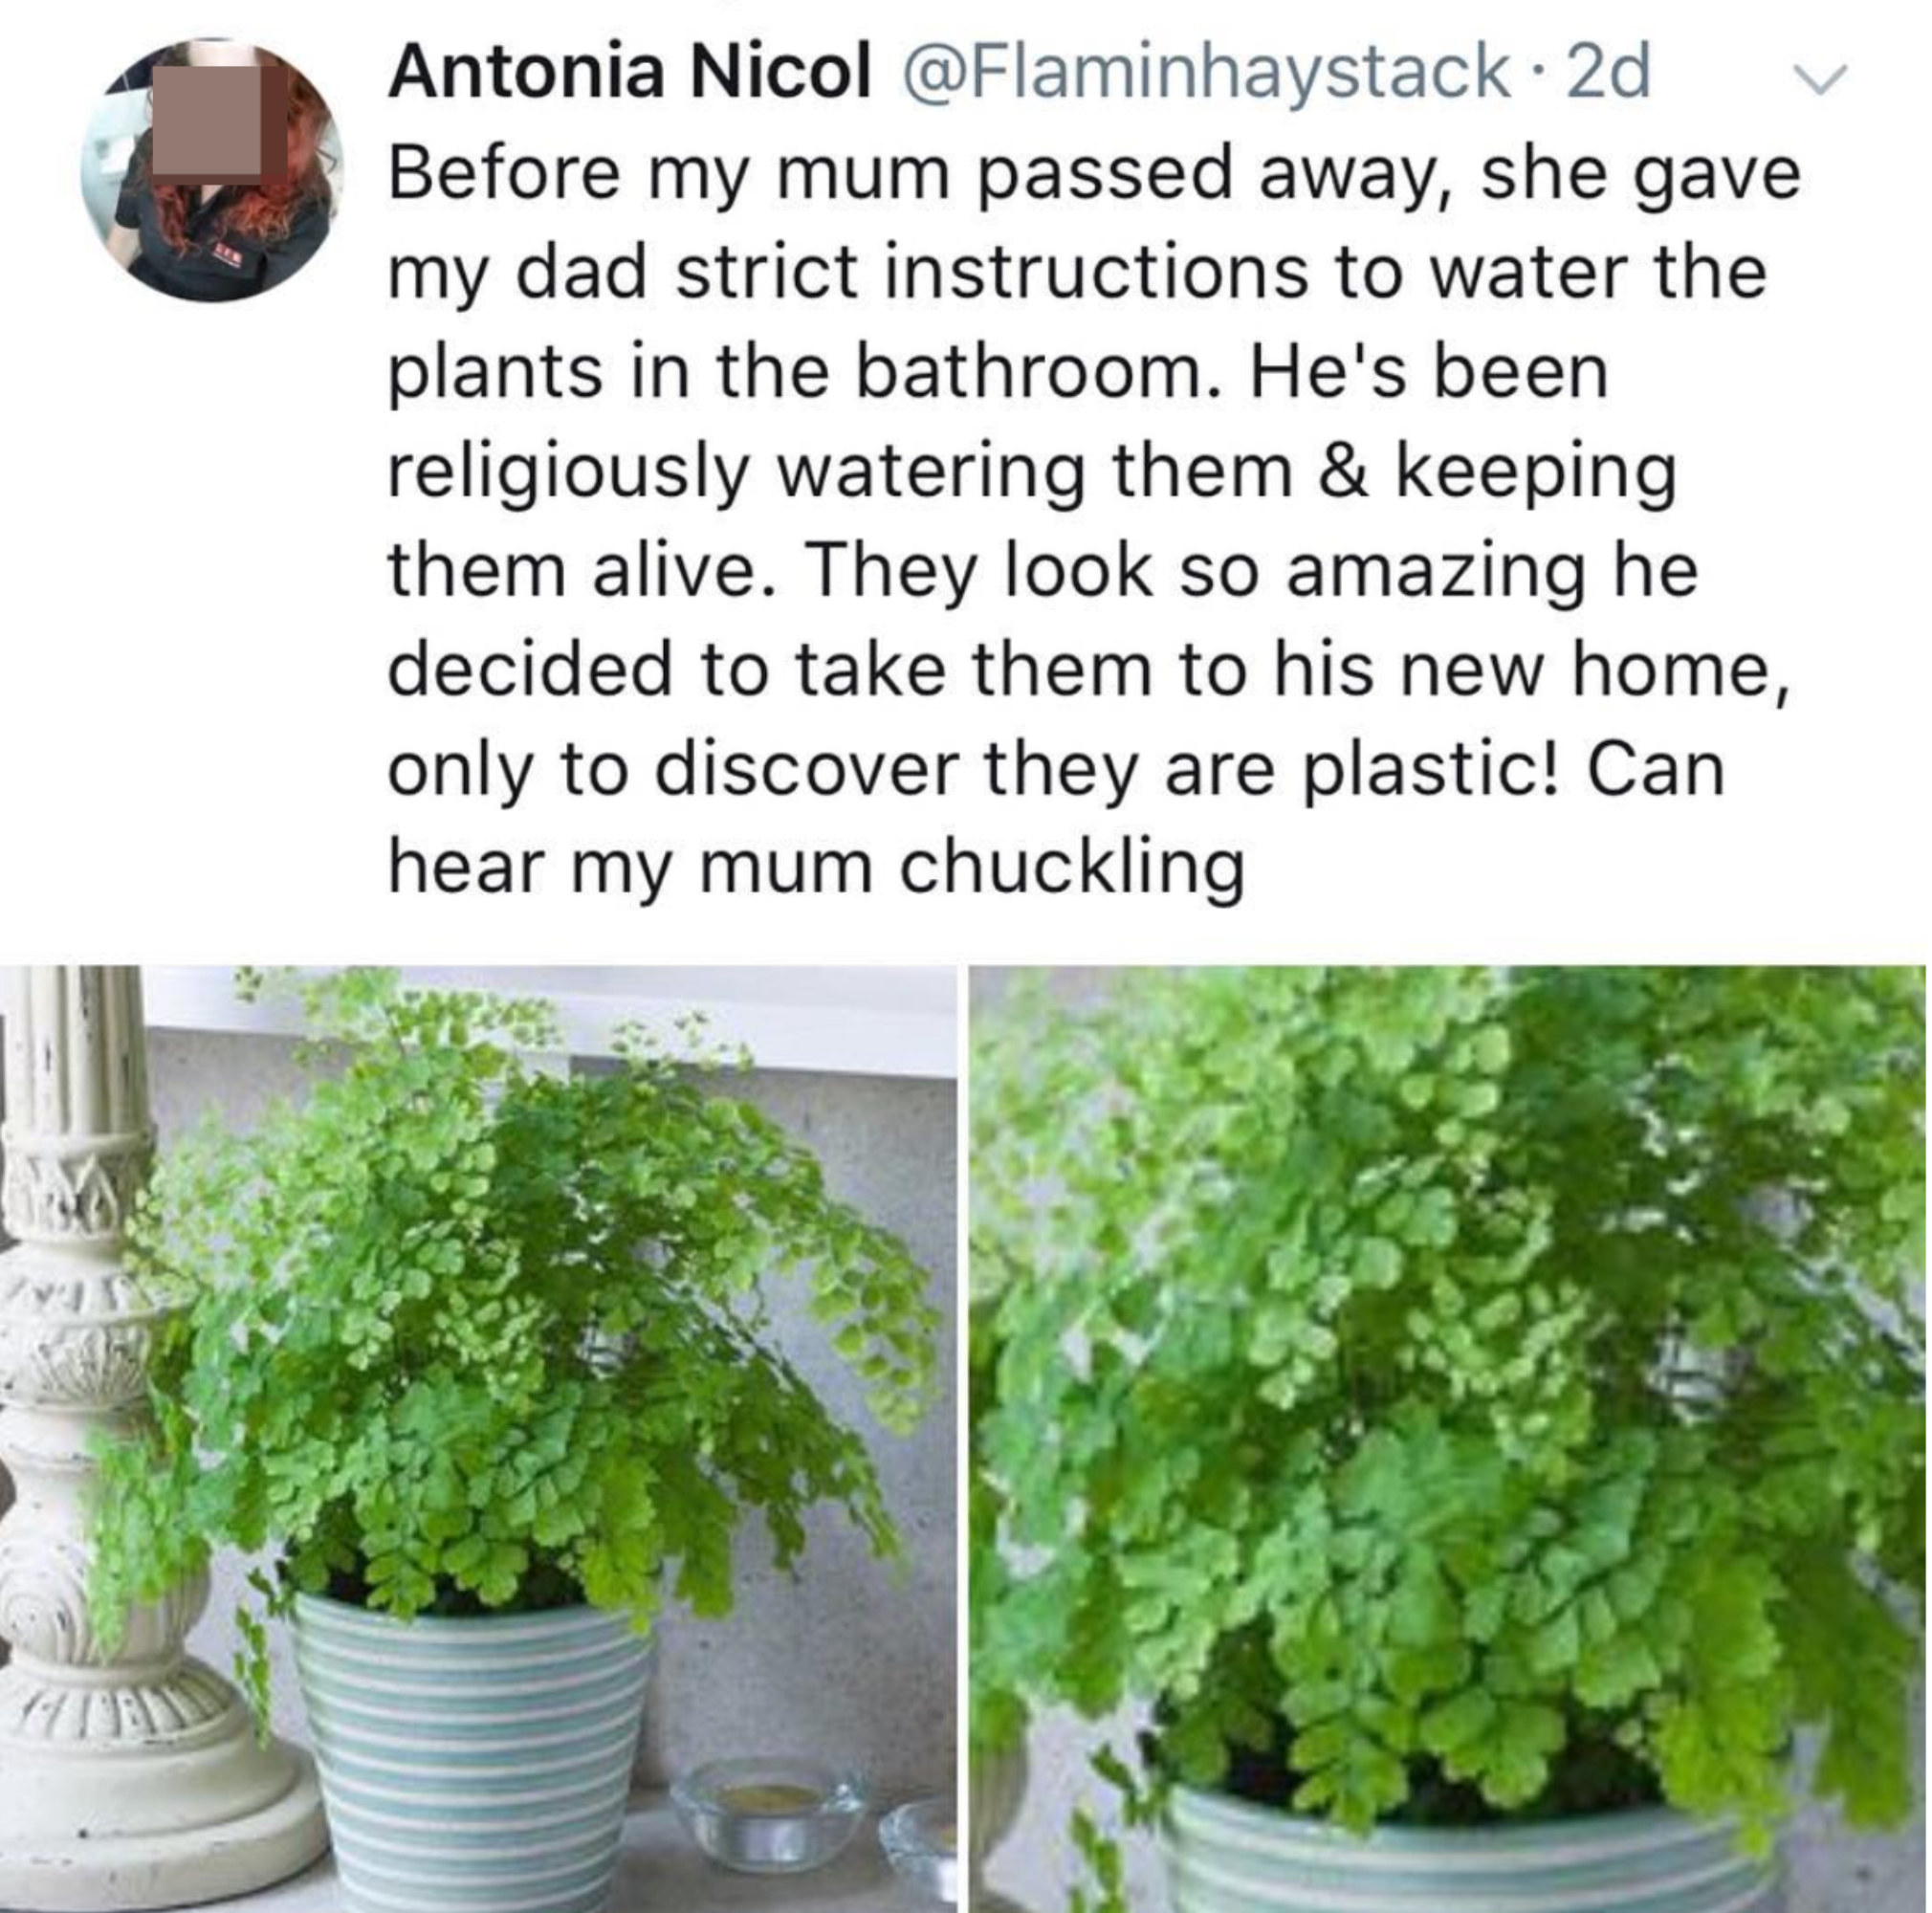 tweet reading Before my mum passed away, she gave my dad strict instructions to water the plants in the bathroom. They look so amazing he decided to take them to his new home, only to discover they are plastic!
